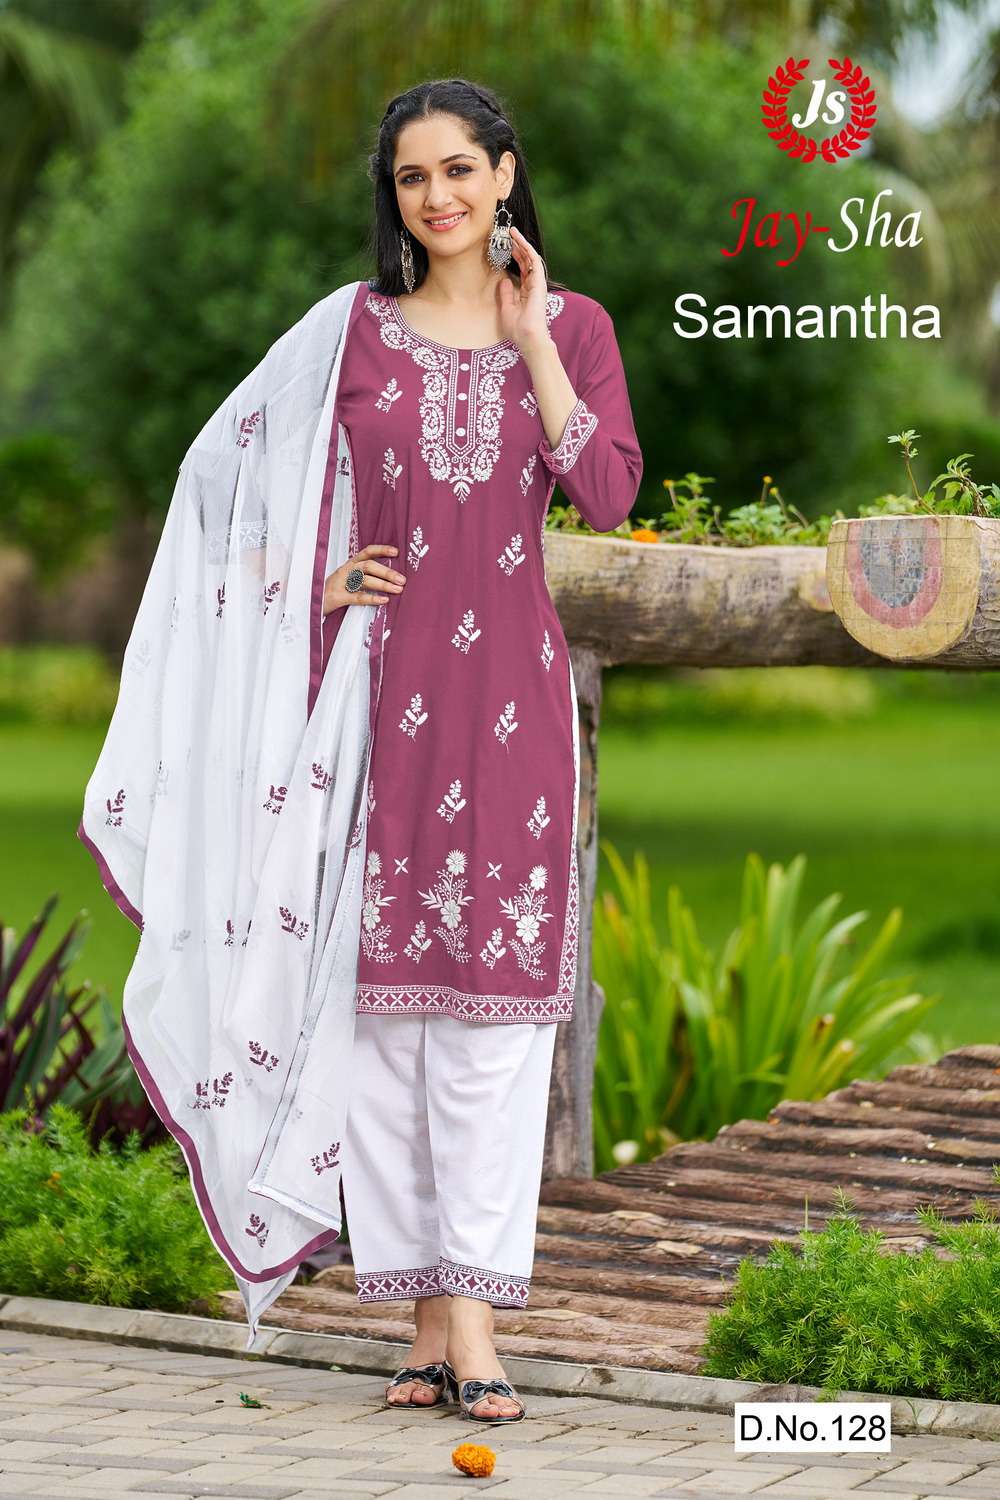 Samantha's Classic Casual Kurta Sets that are must have in your wardrobe  too - avalglitz.com